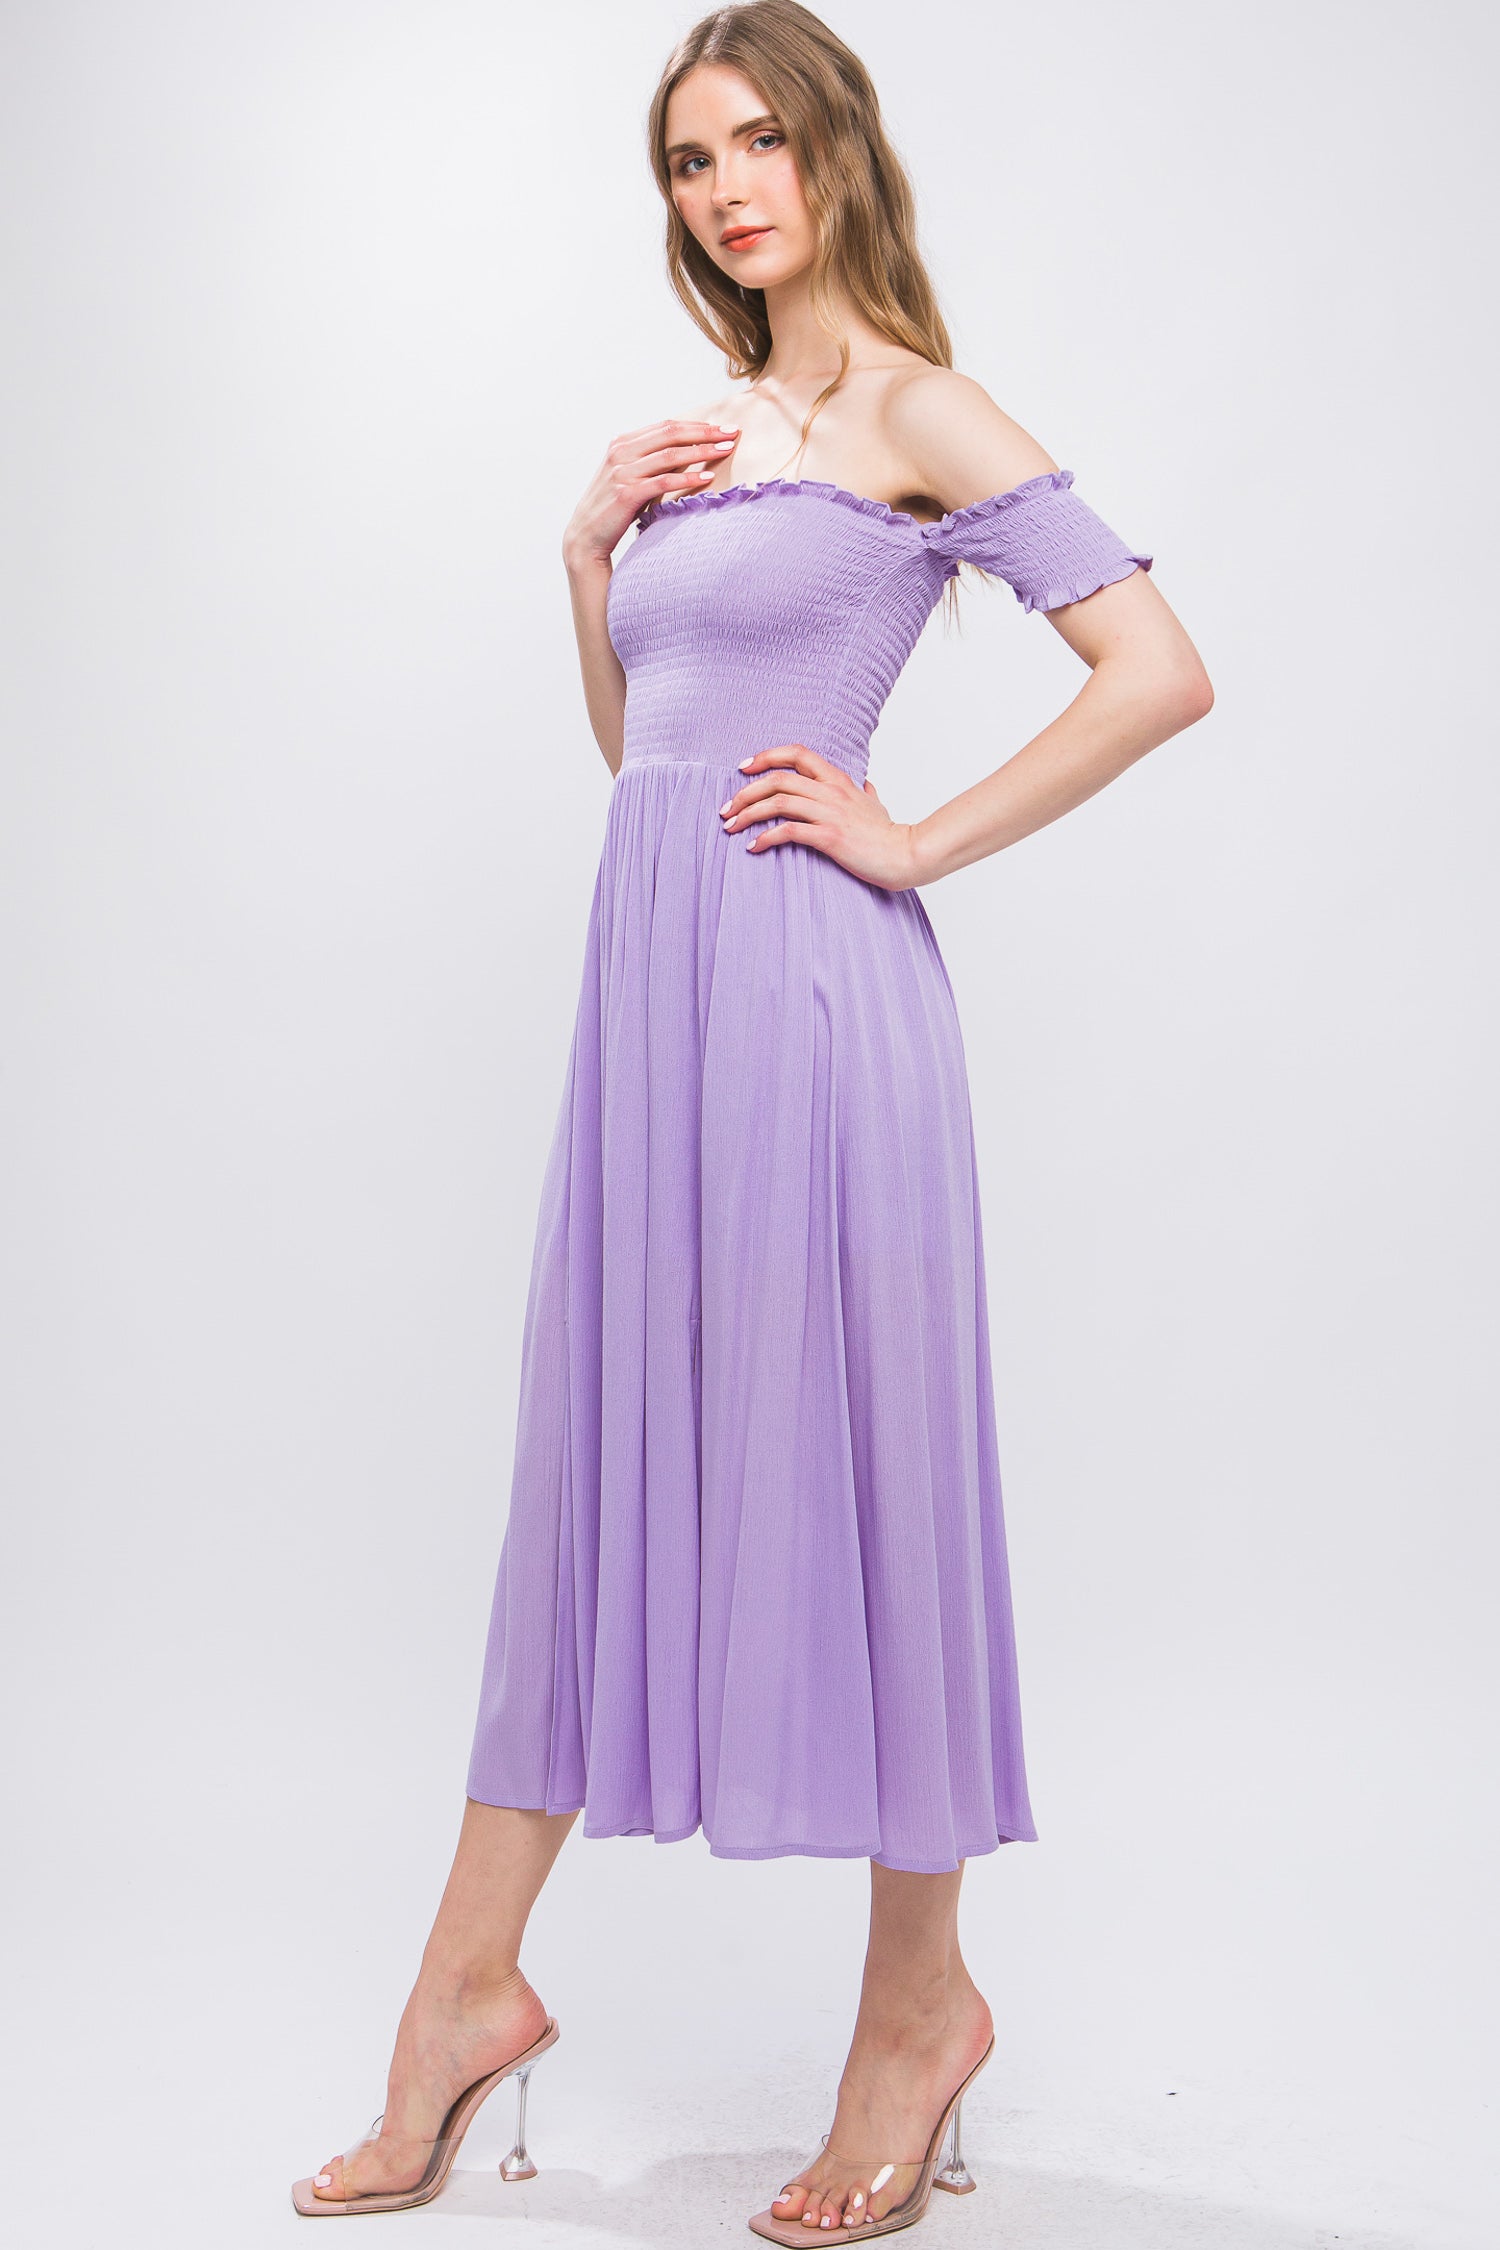 LAVENDER Flowy Off The Shoulder Dress - 6 colors - Ships from The USA - women's dress at TFC&H Co.